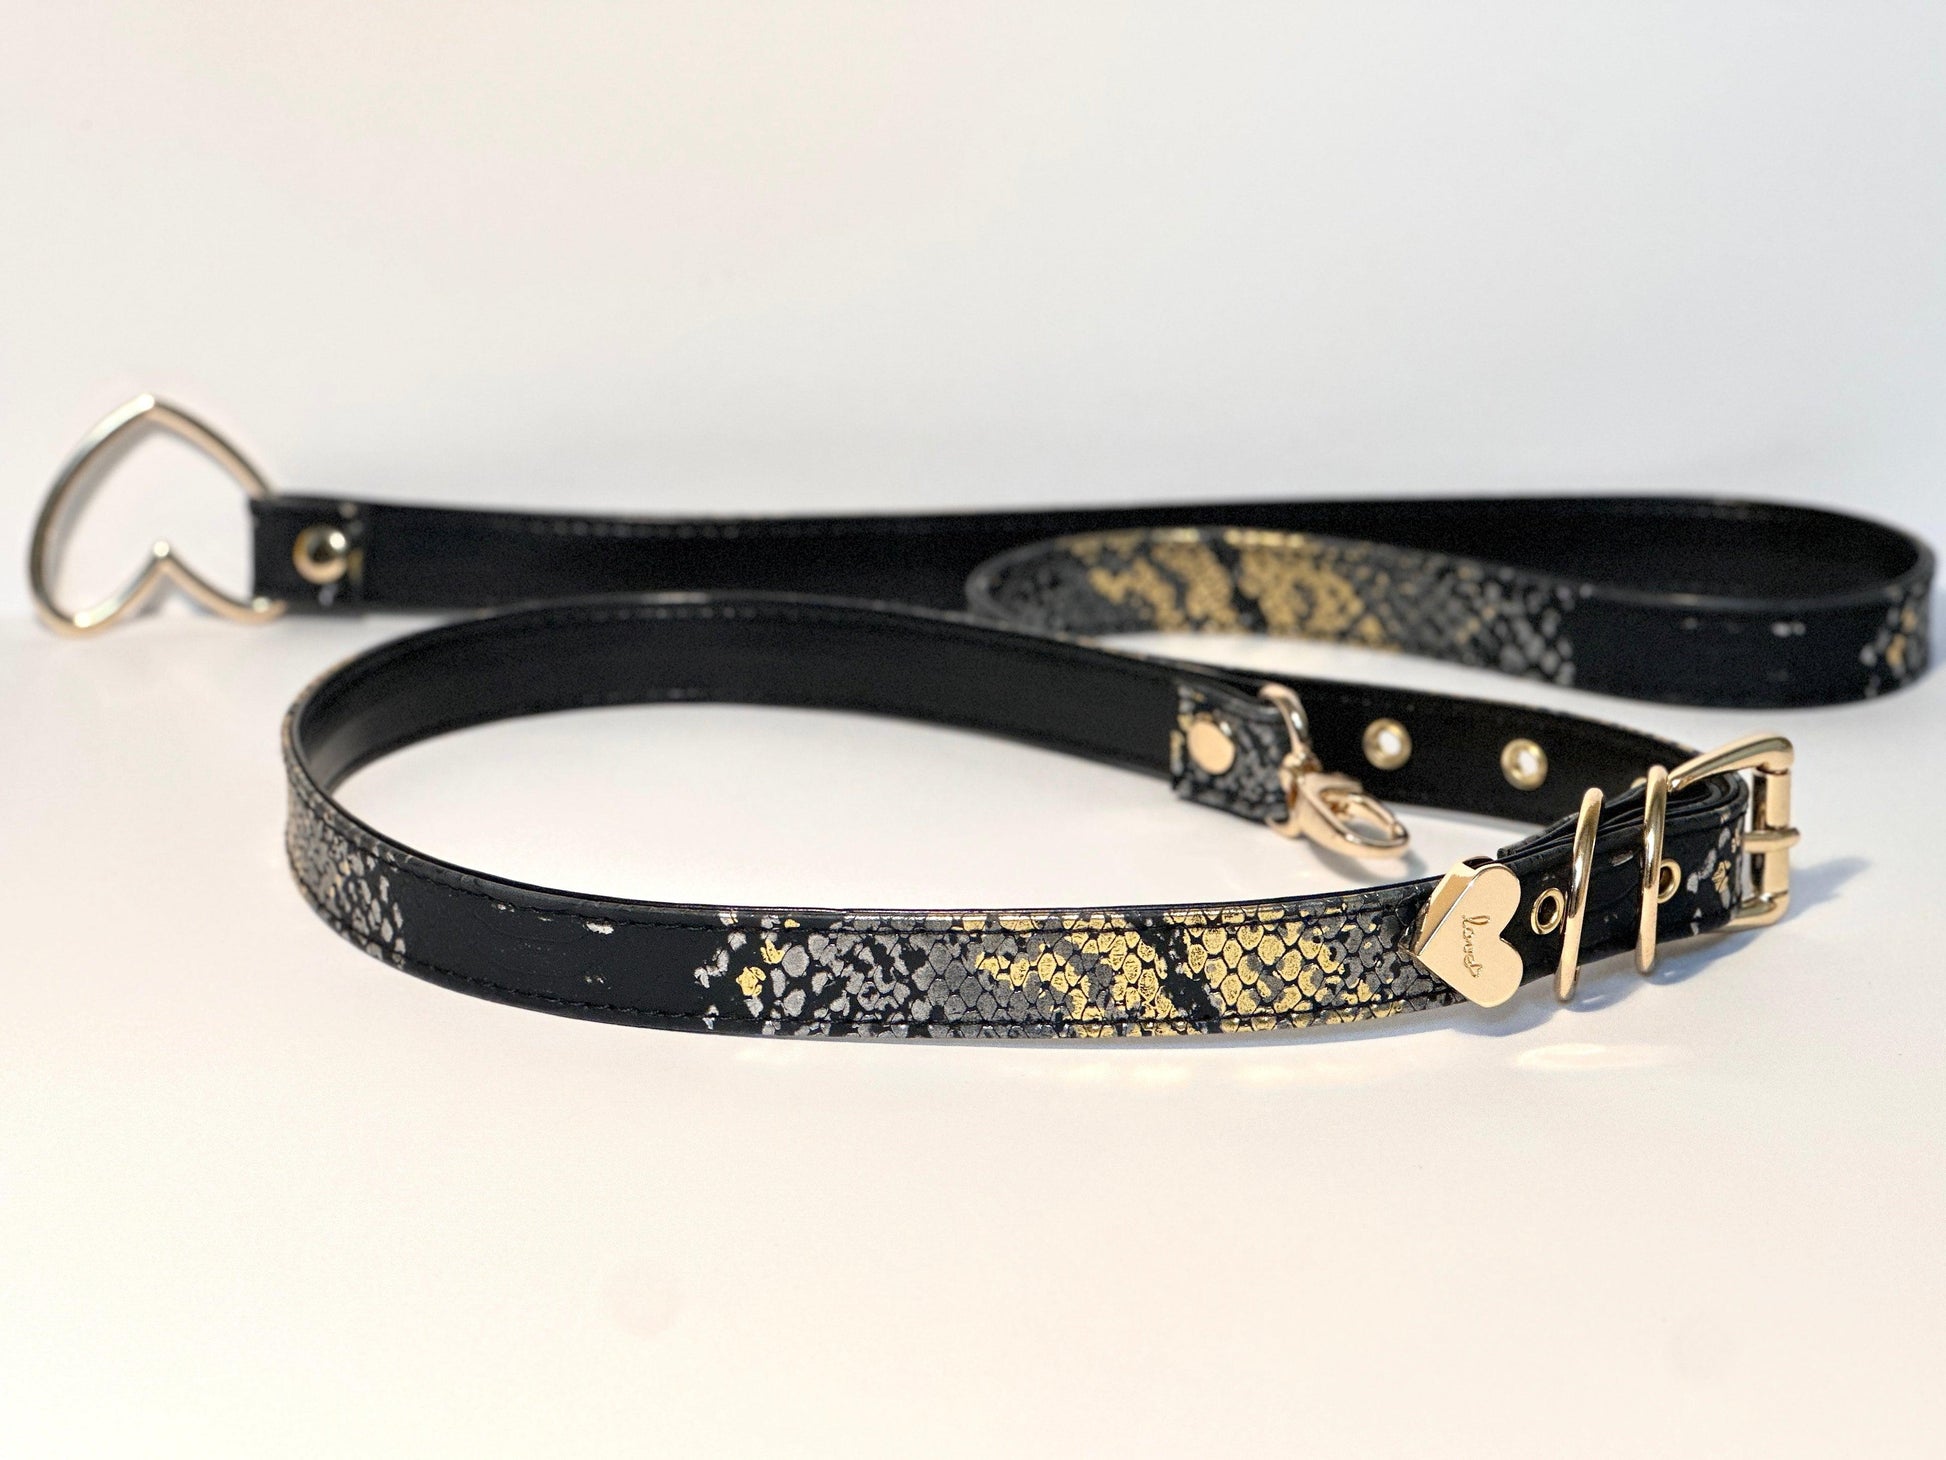 Elegant Black BDSM Collar with Personalized Letters by Master Love